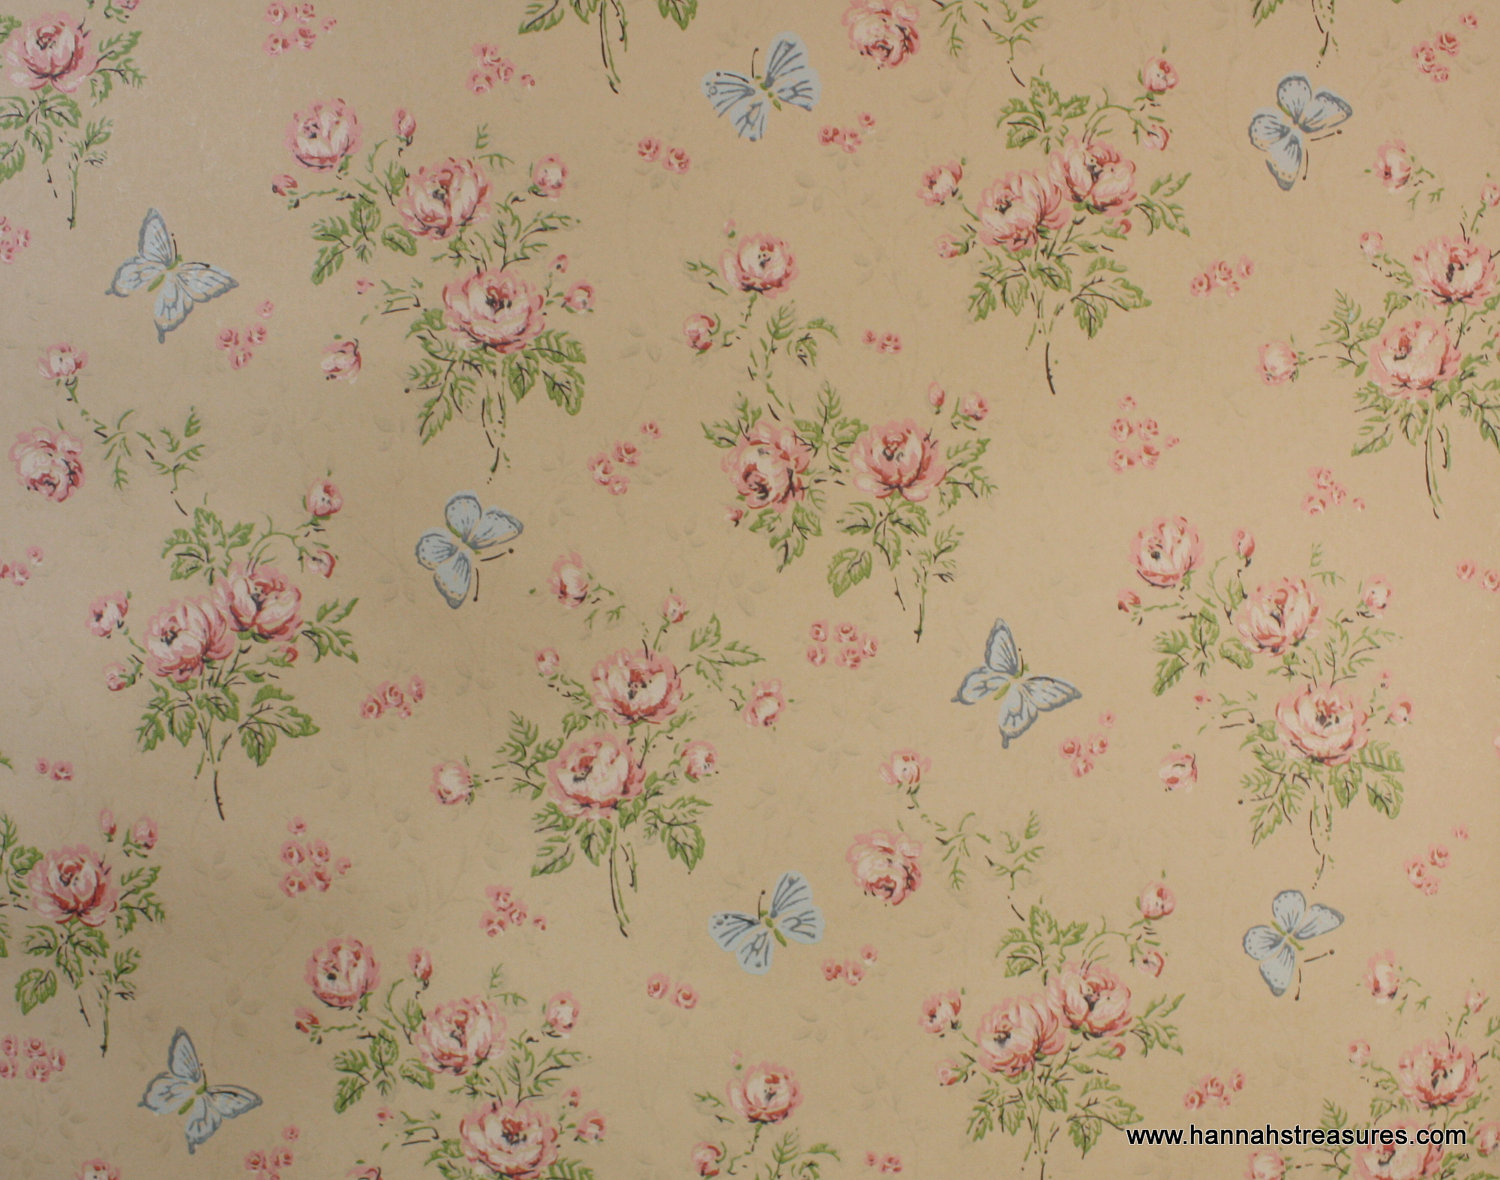 S Vintage Wallpaper Pink Roses And Blue By Hannahstreasures